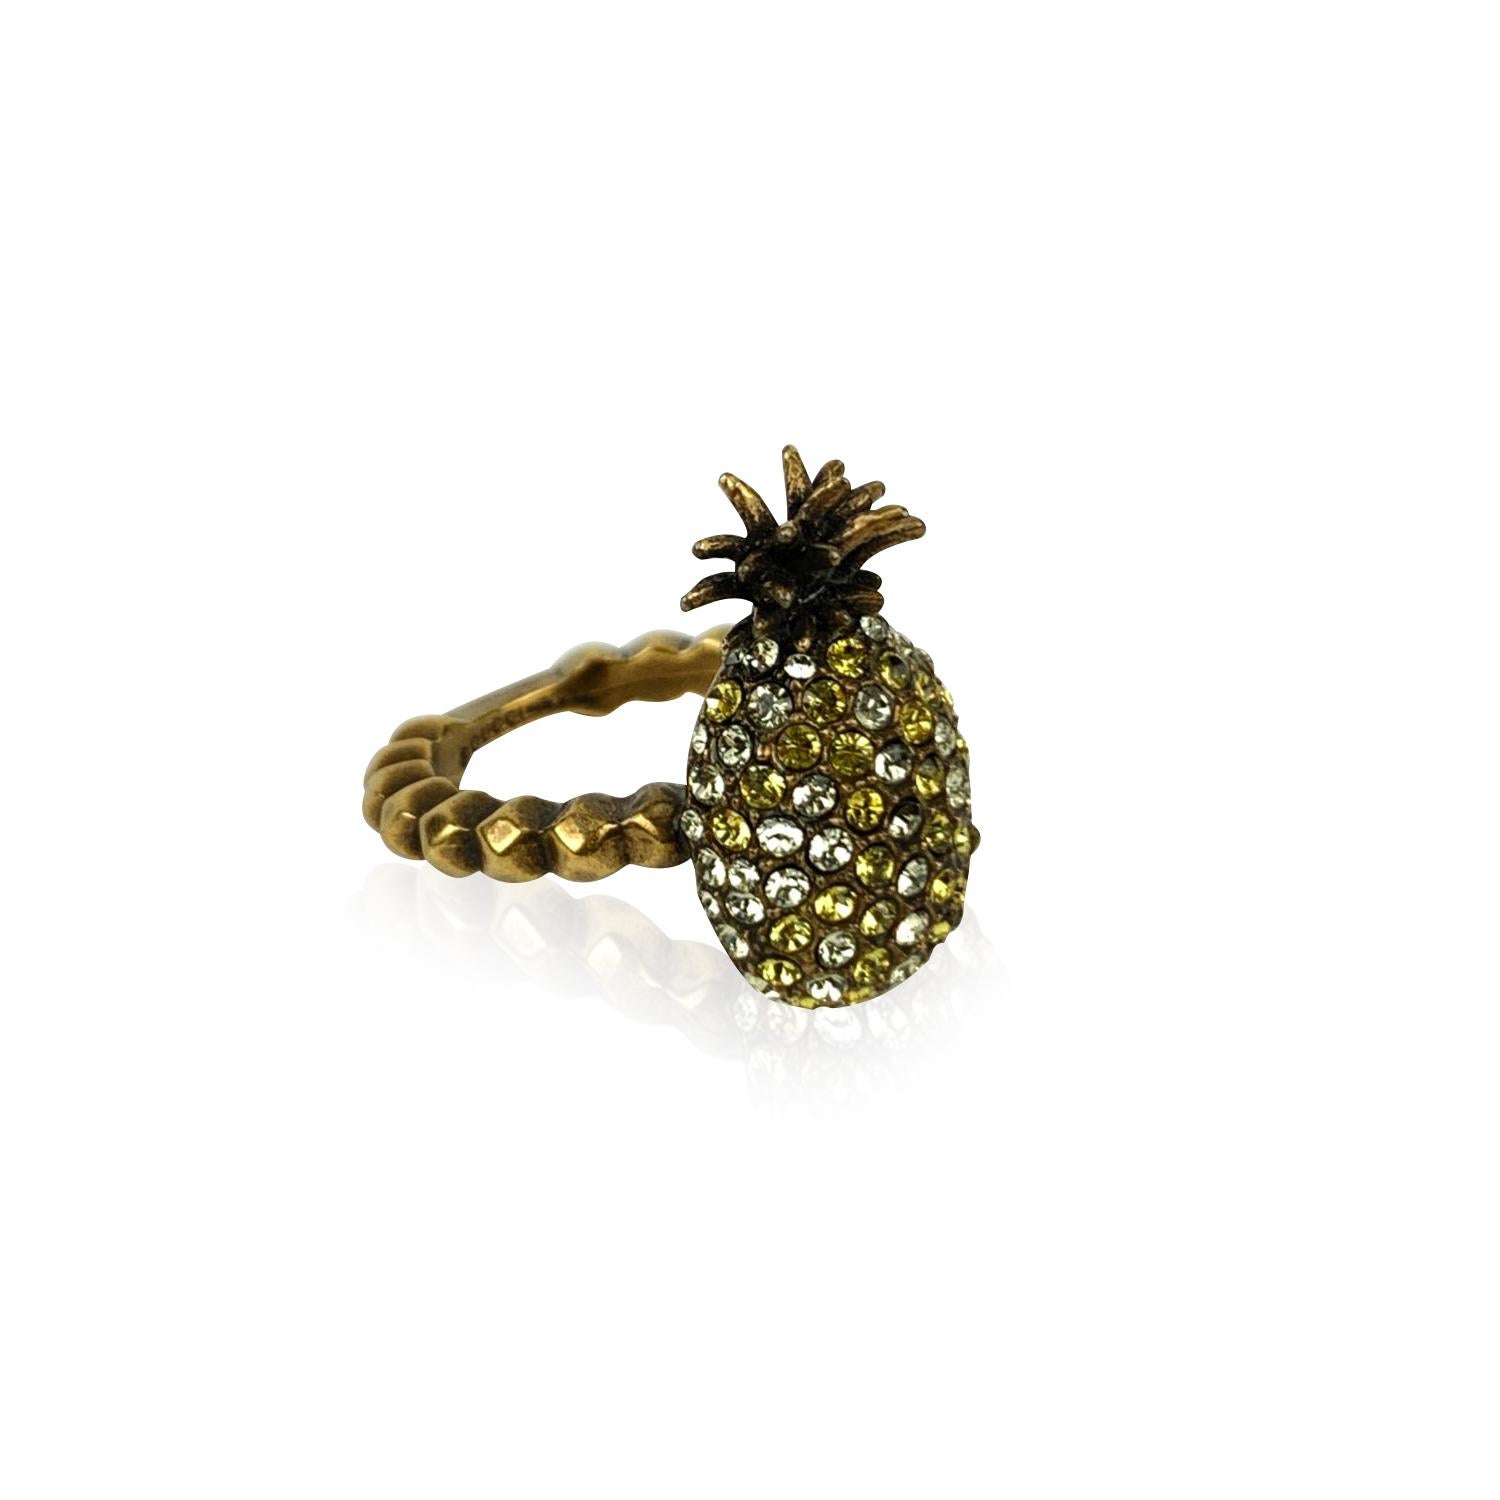 Beautiful embellished 'Pineapple' ring by Gucci. It features an aged gold metal body, with a studded design. The pineapple ornament on top is embellished with white and yellow crystals. Size: M (it should correspond to a size 7.75 US, 56 EU, 16 IT).